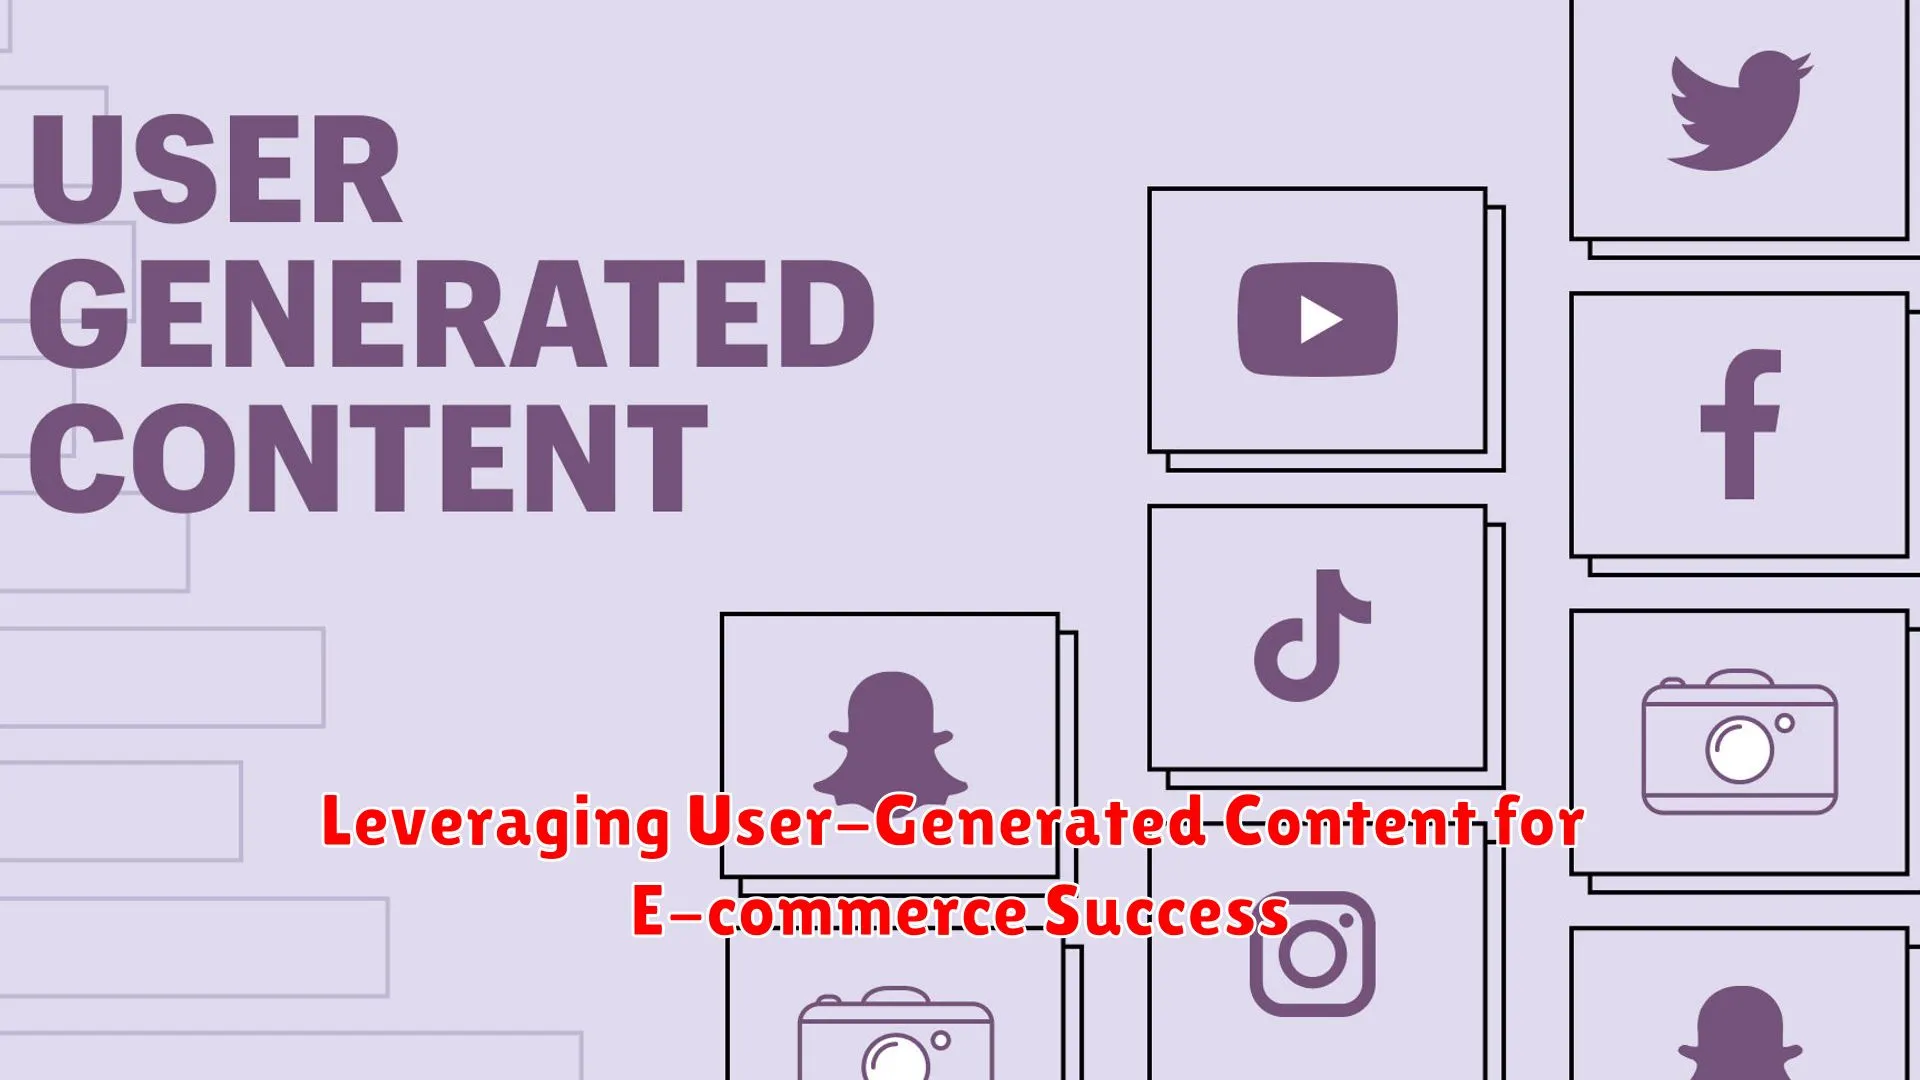 Leveraging User-Generated Content for E-commerce Success